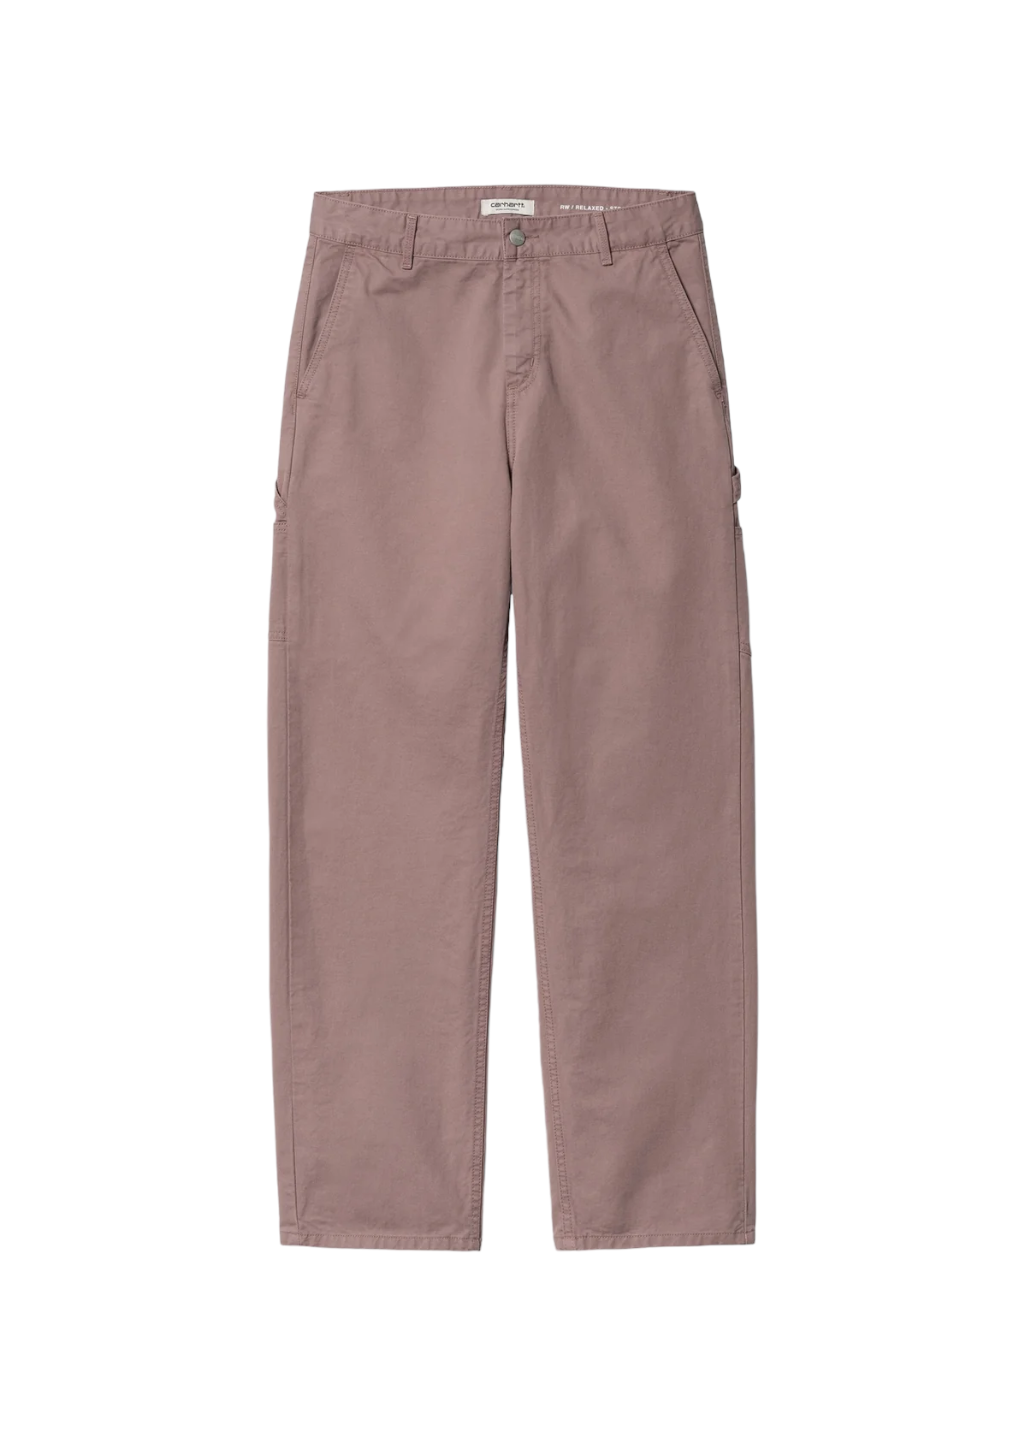 W PIERCE PANT STRAIGHT I030289 Trousers DUSTY H BROWN from Carhartt WIP  Women 53 EUR